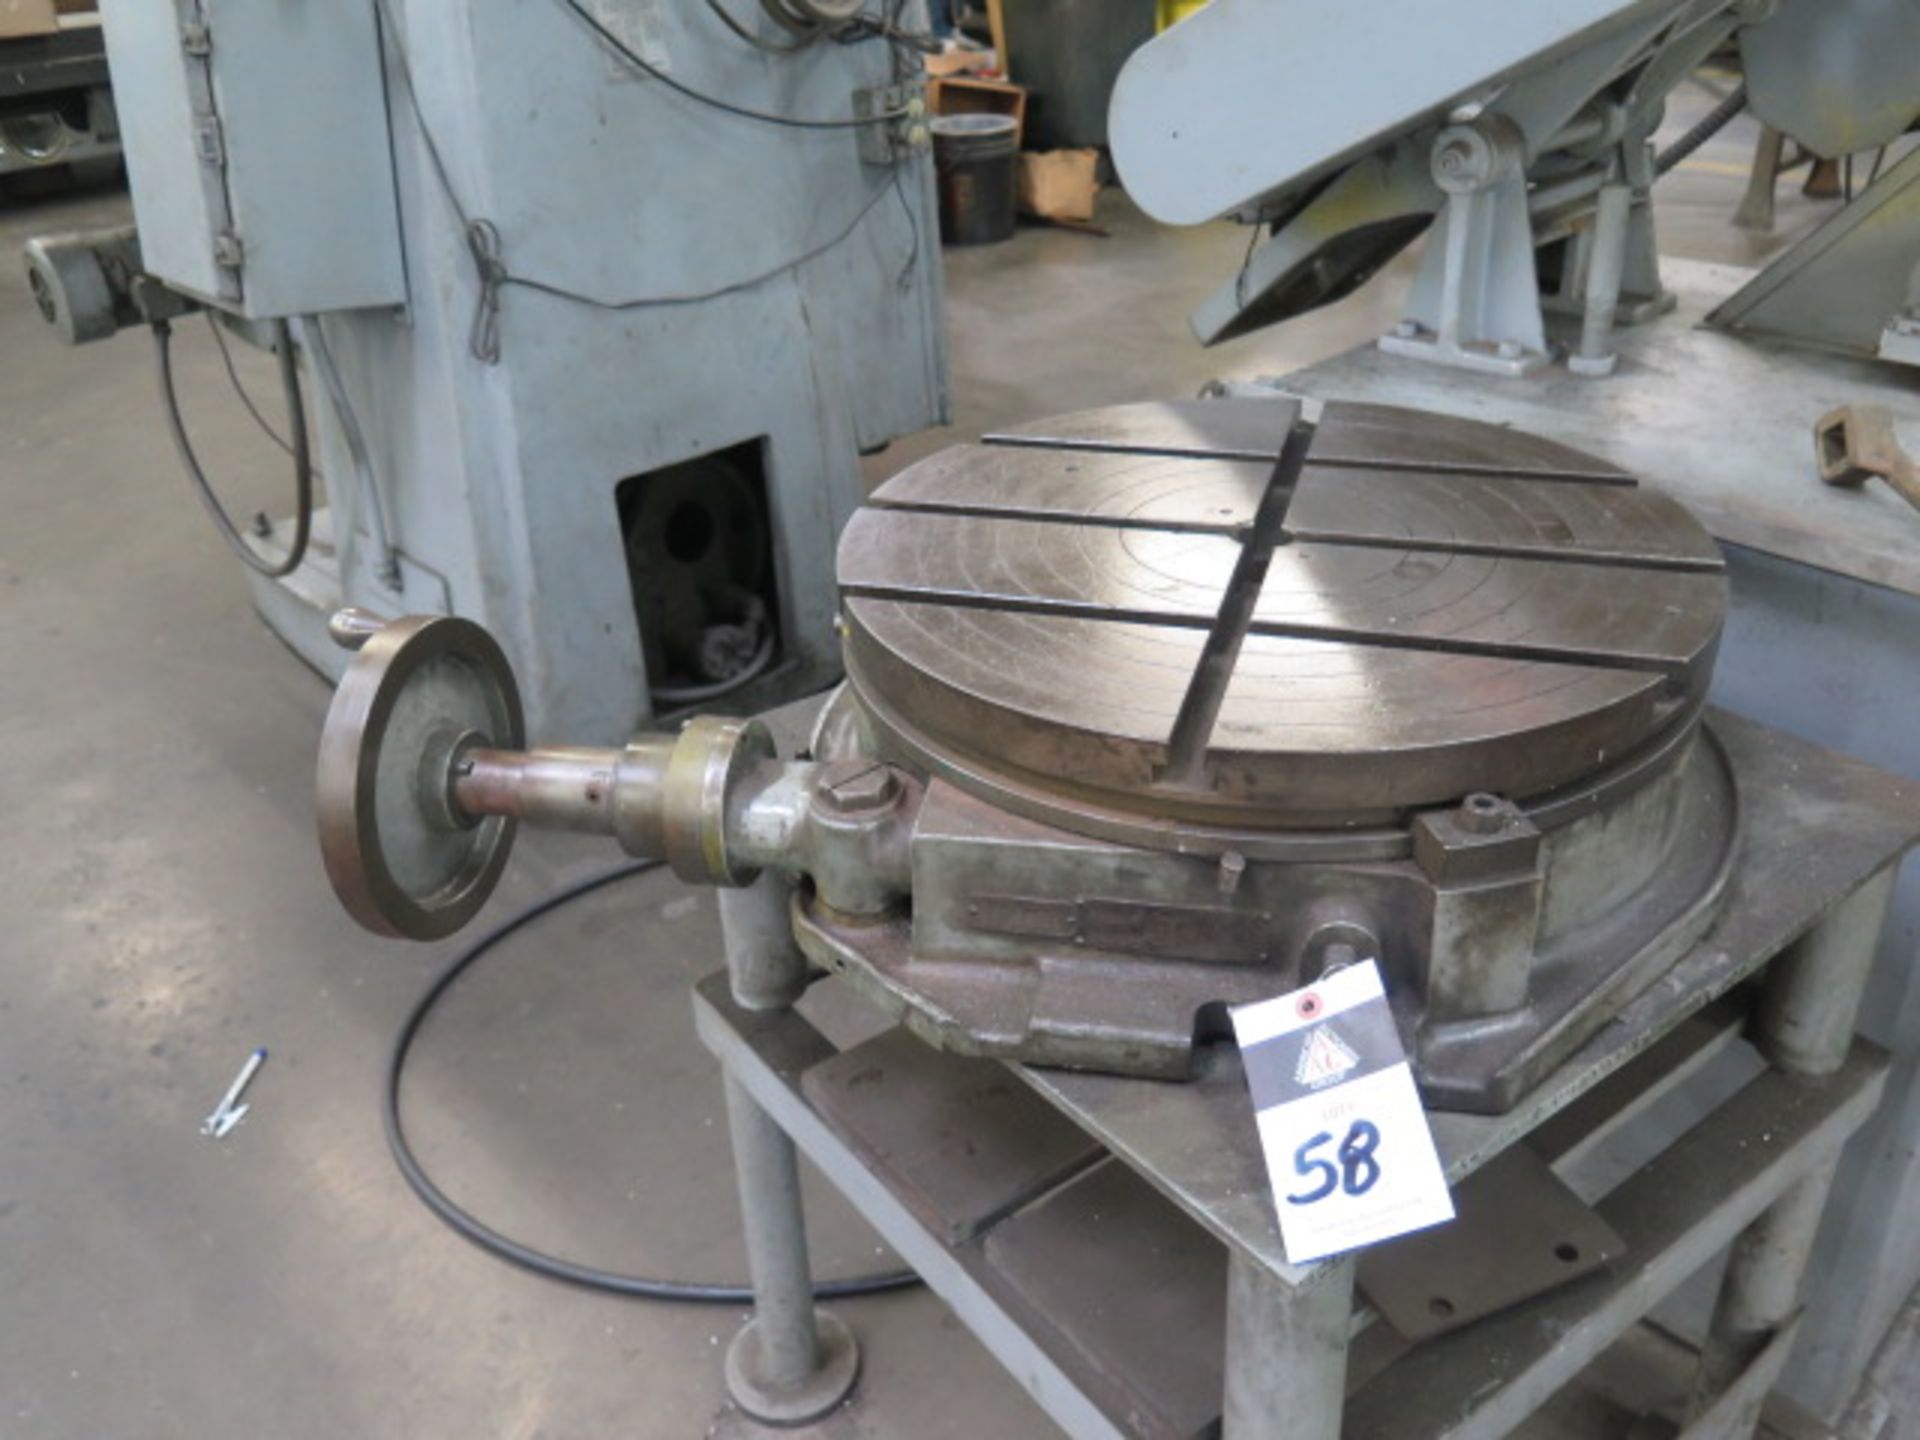 Troyke 21" Rotary Table w/ Table (SOLD AS-IS - NO WARRANTY)